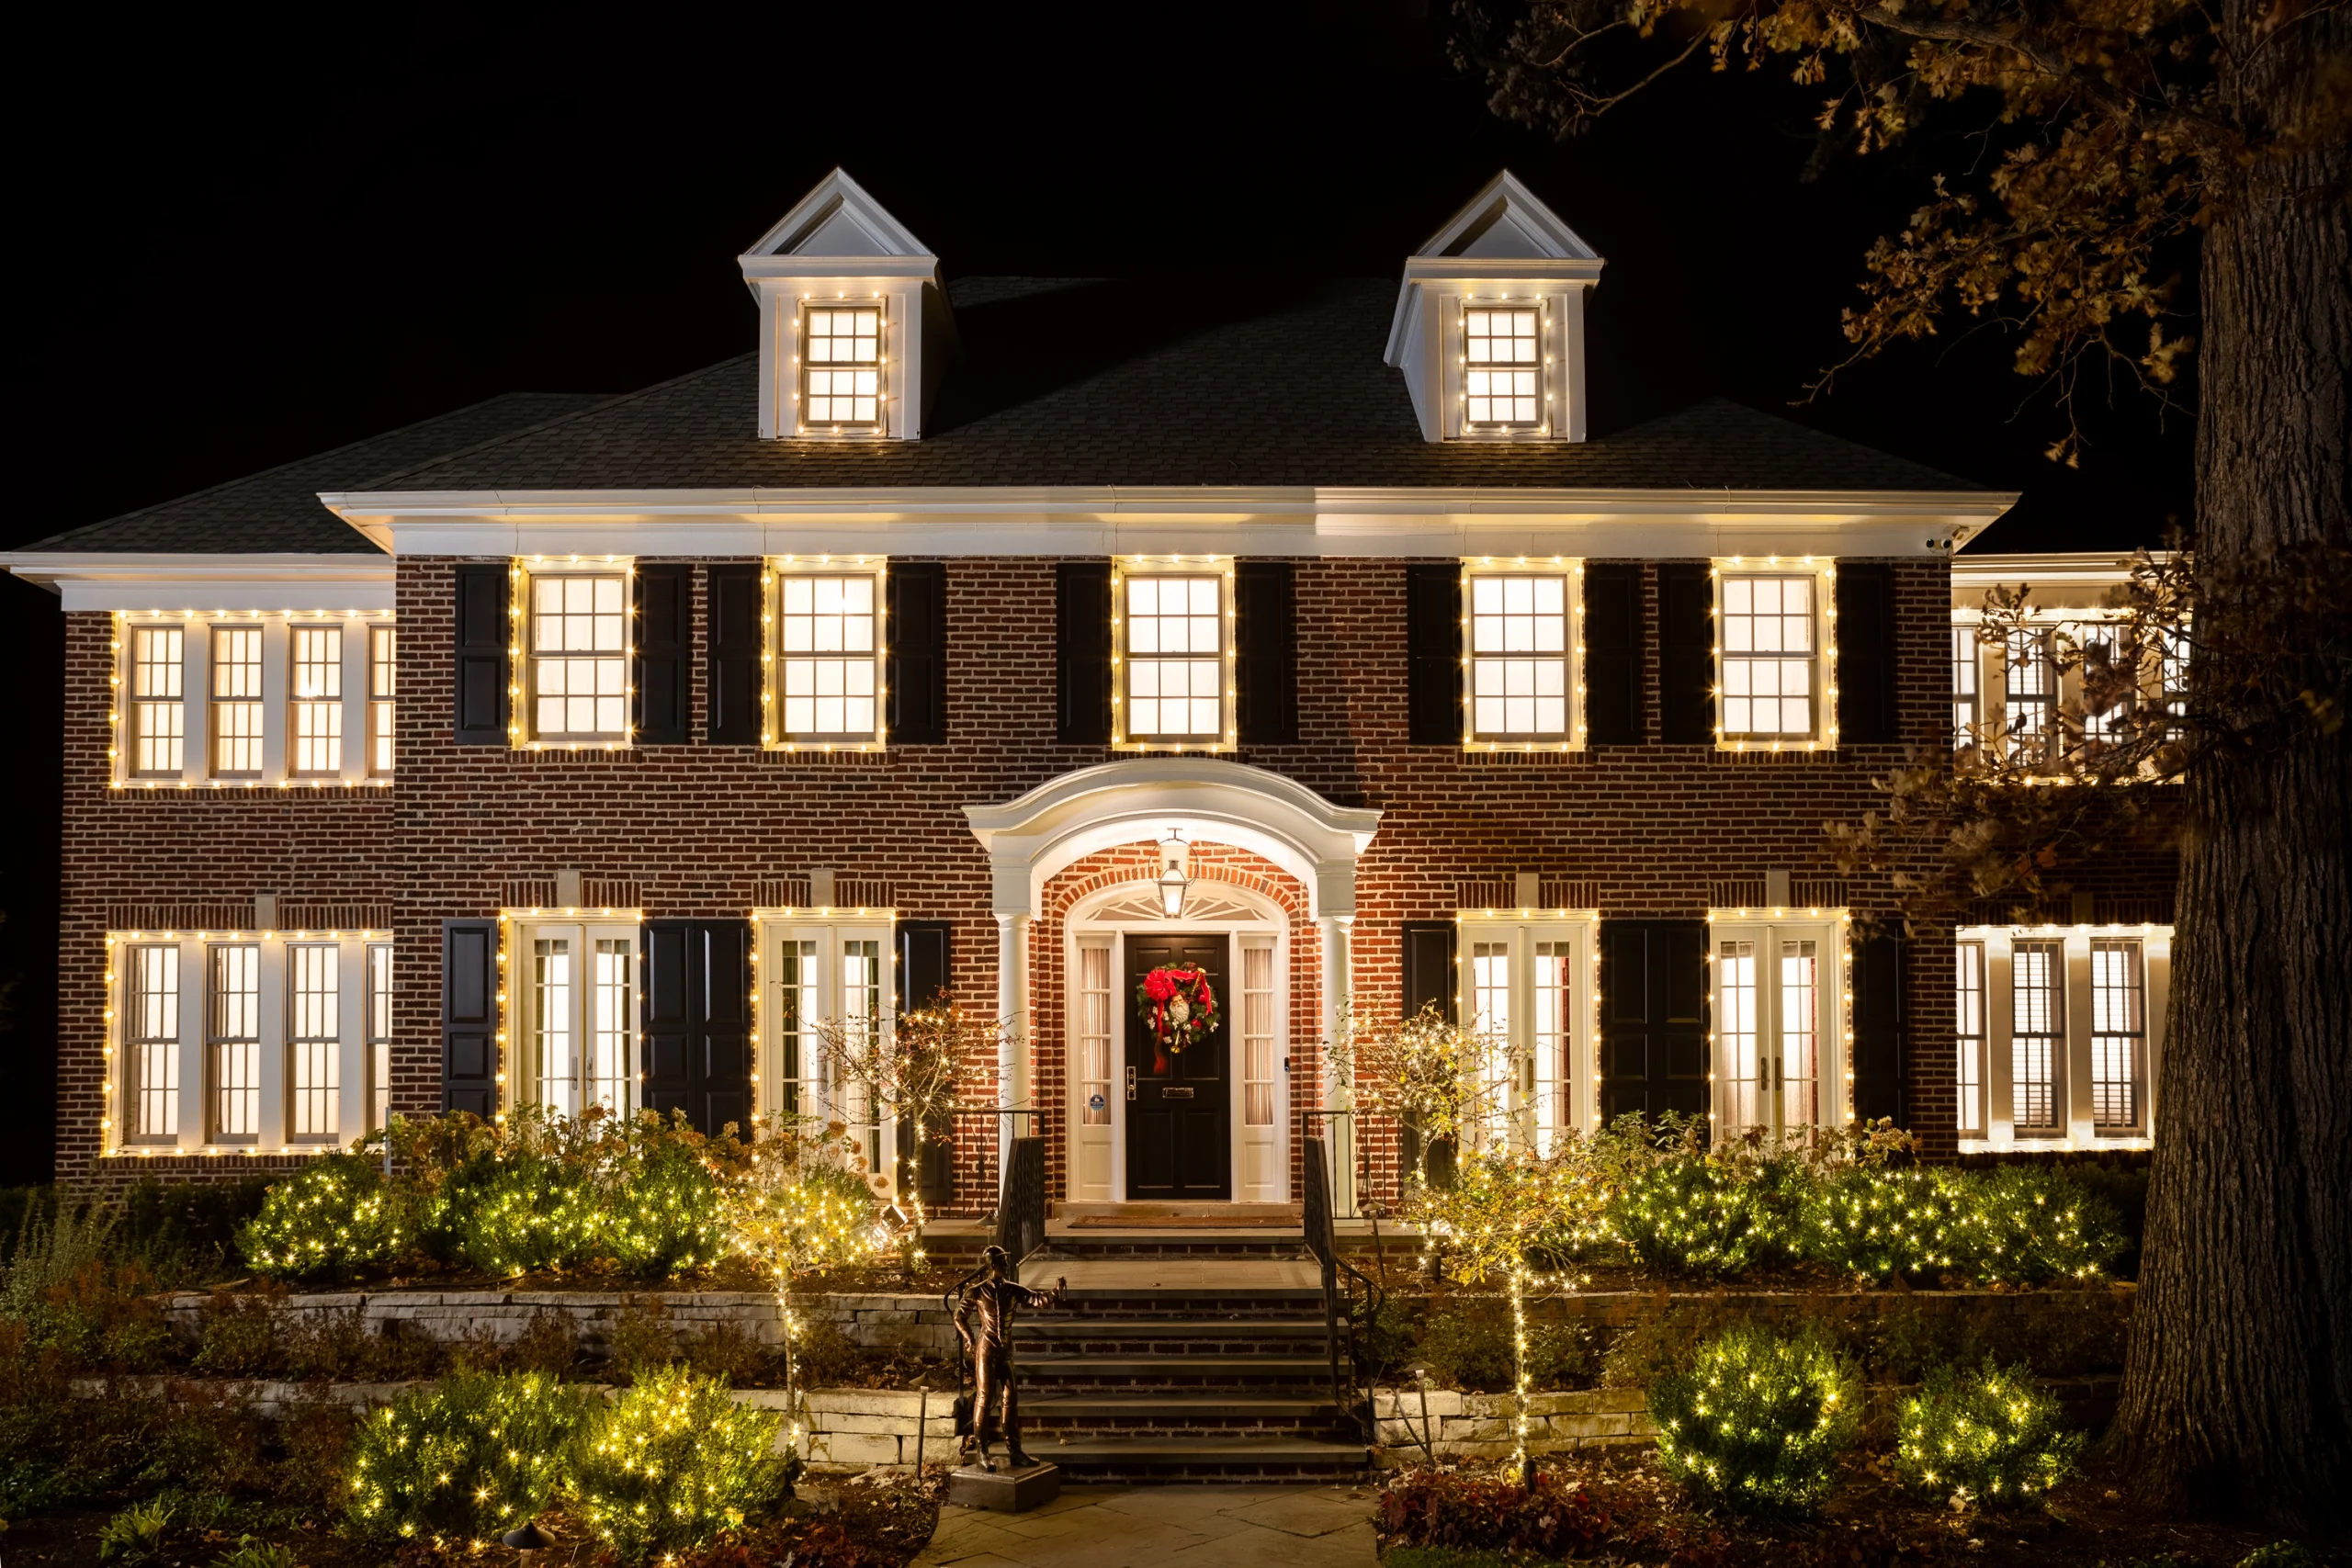 Airbnb Offers One Night Only in the Original ‘Home Alone’ House